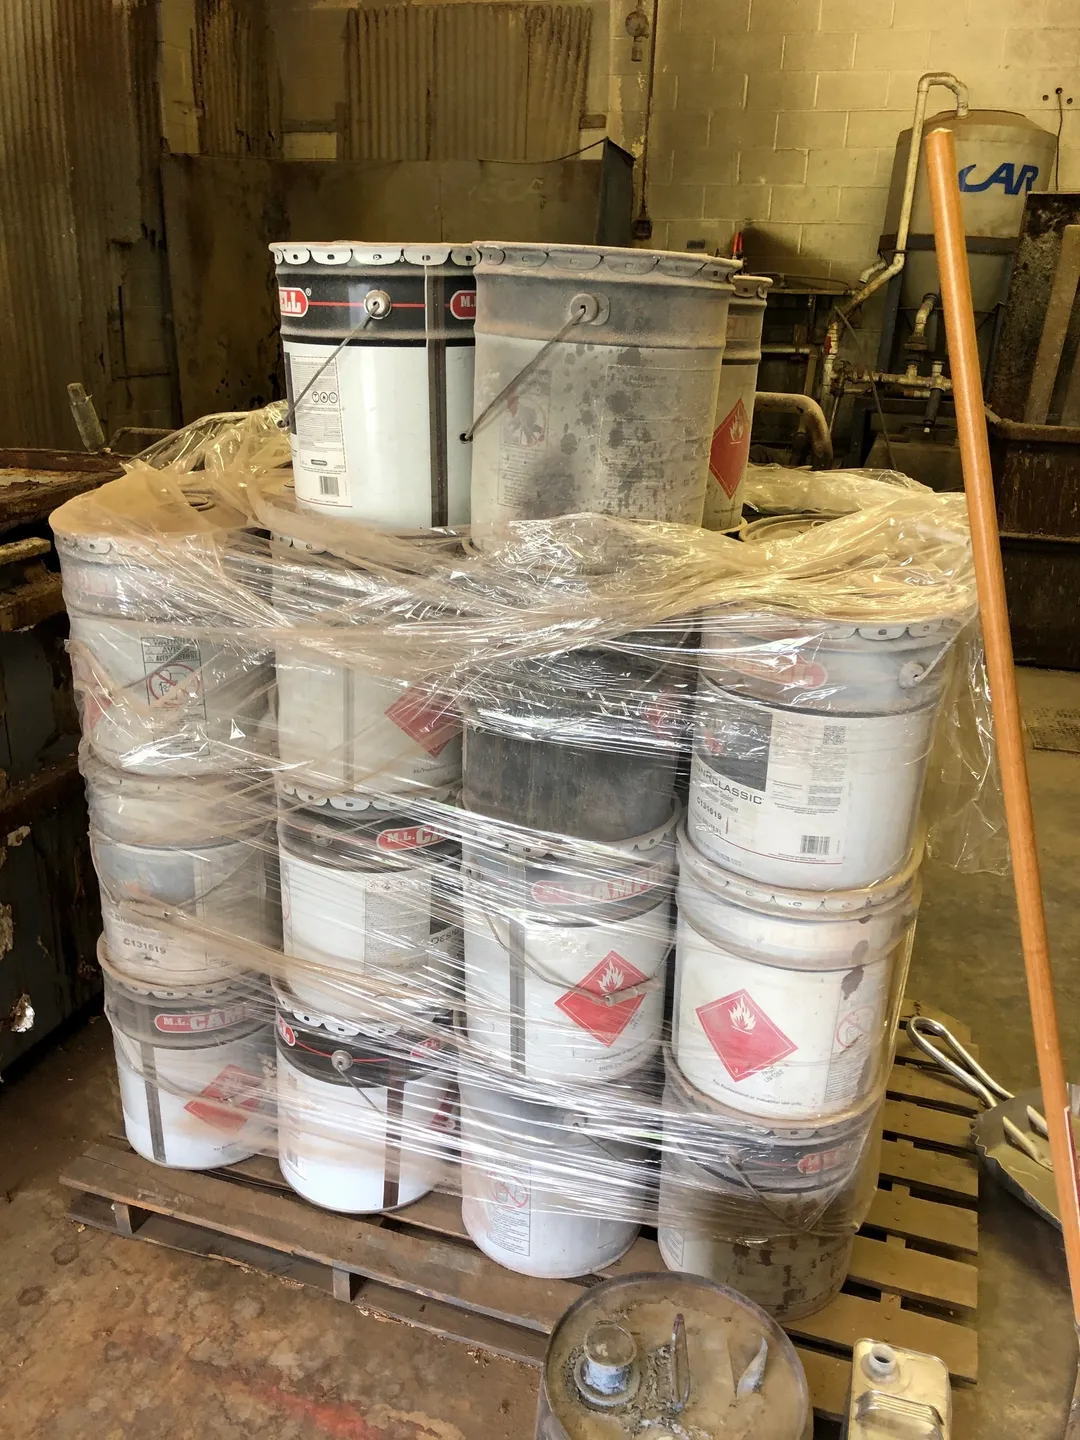 A stack of paint buckets wrapped in plastic.